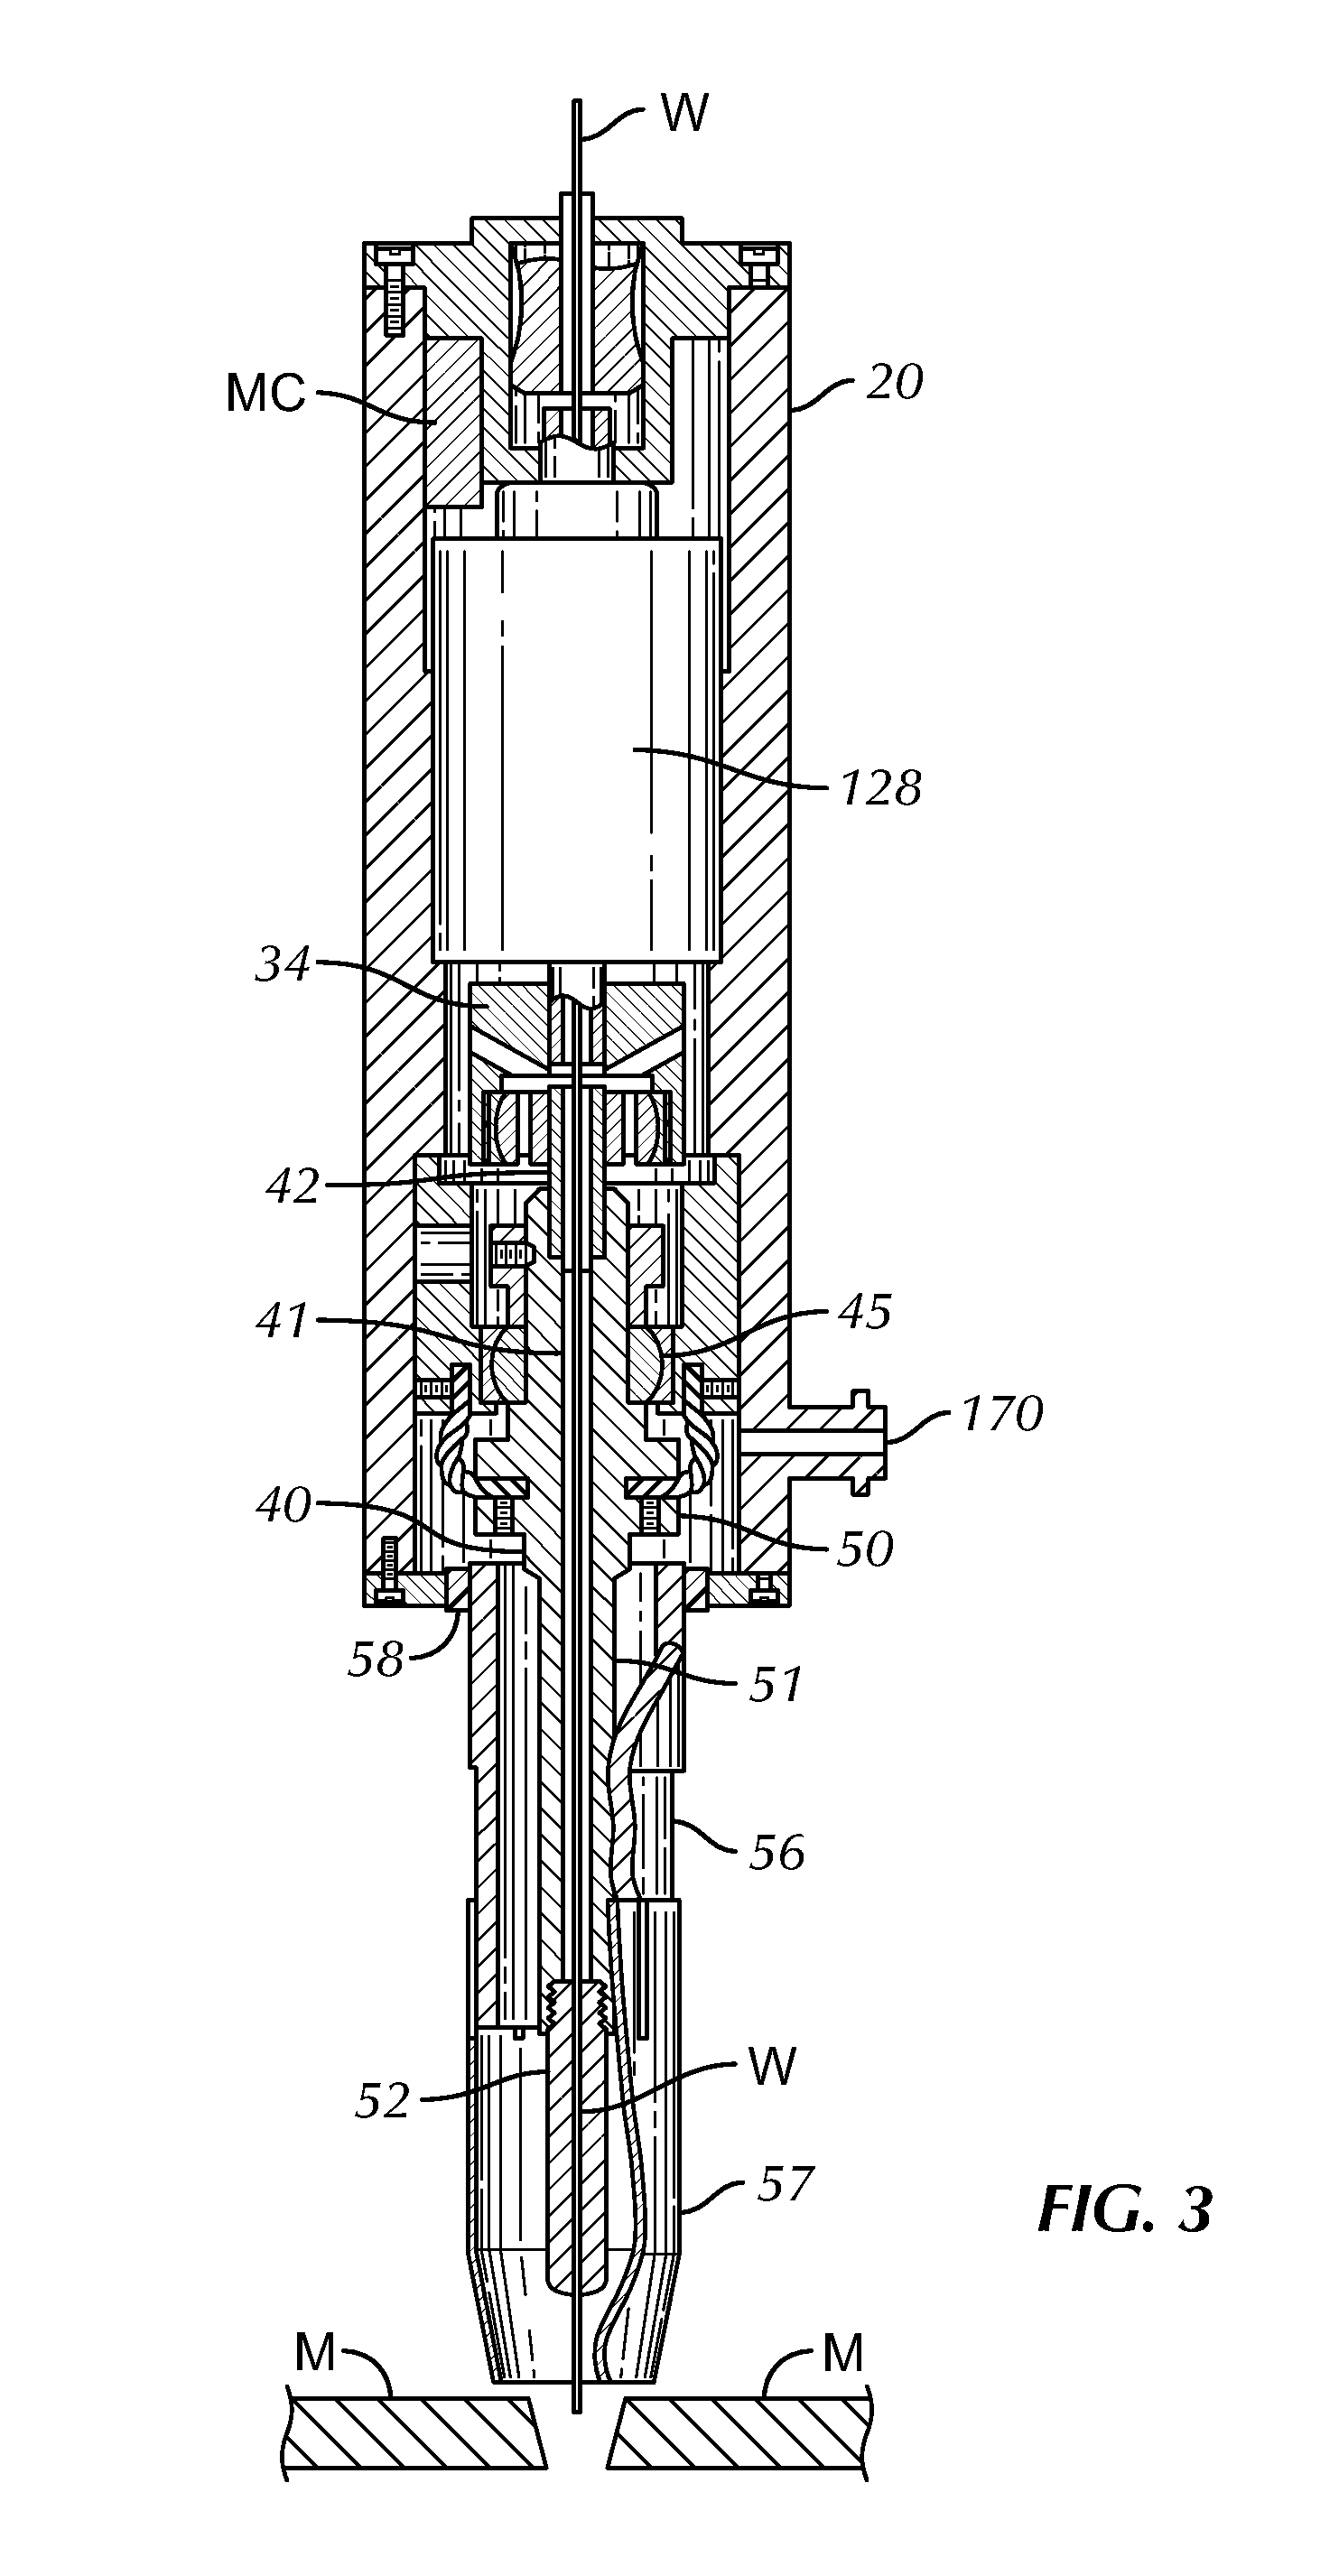 Apparatus and Method for use of Rotating Arc Process Welding